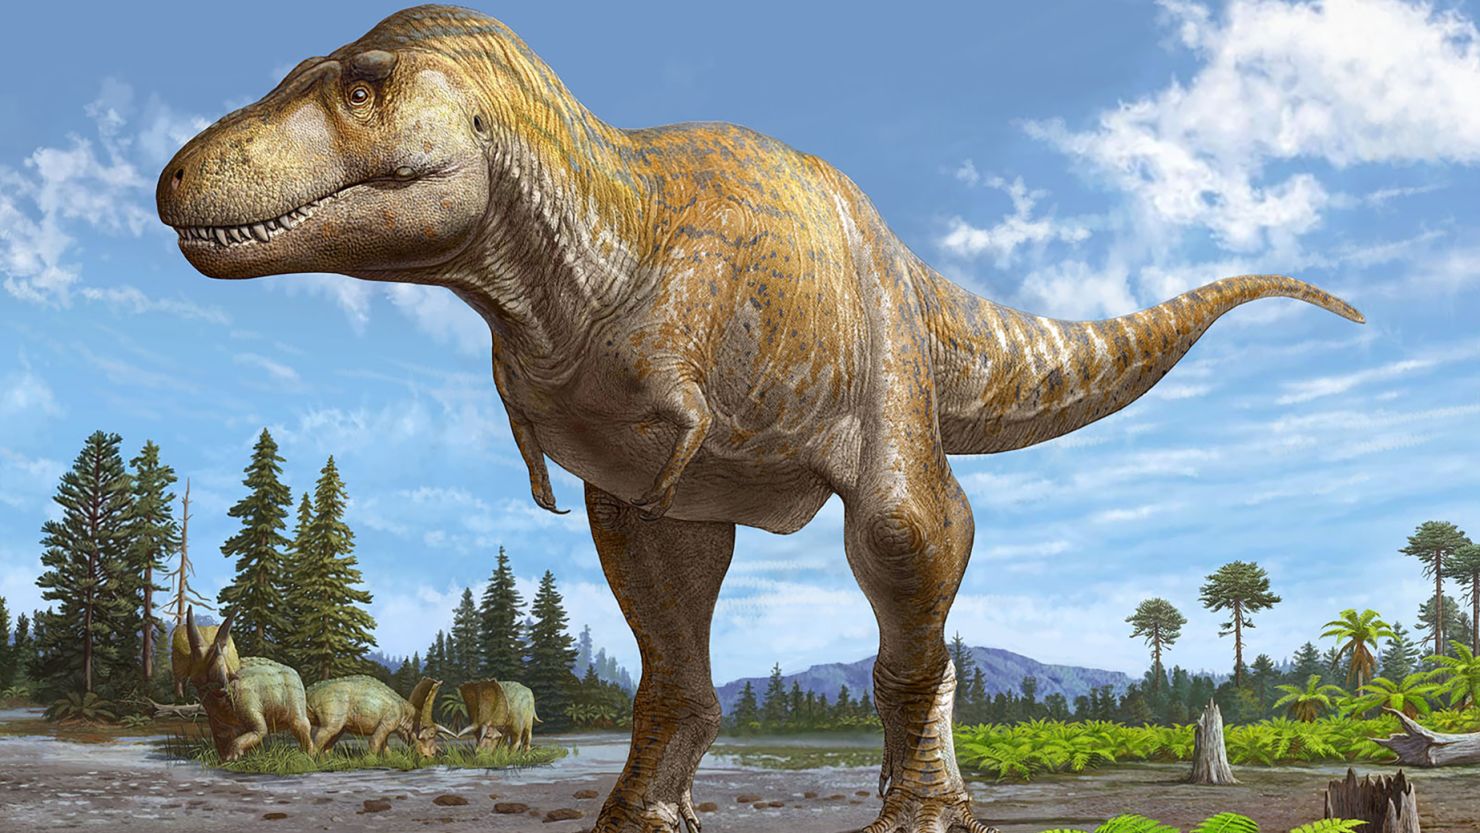 A rendering shows Tyrannosaurus mcraeensis, a newly discovered relative of Tyrannosaurus rex. The creature likely roamed Earth up to 7 million years before T. rex.